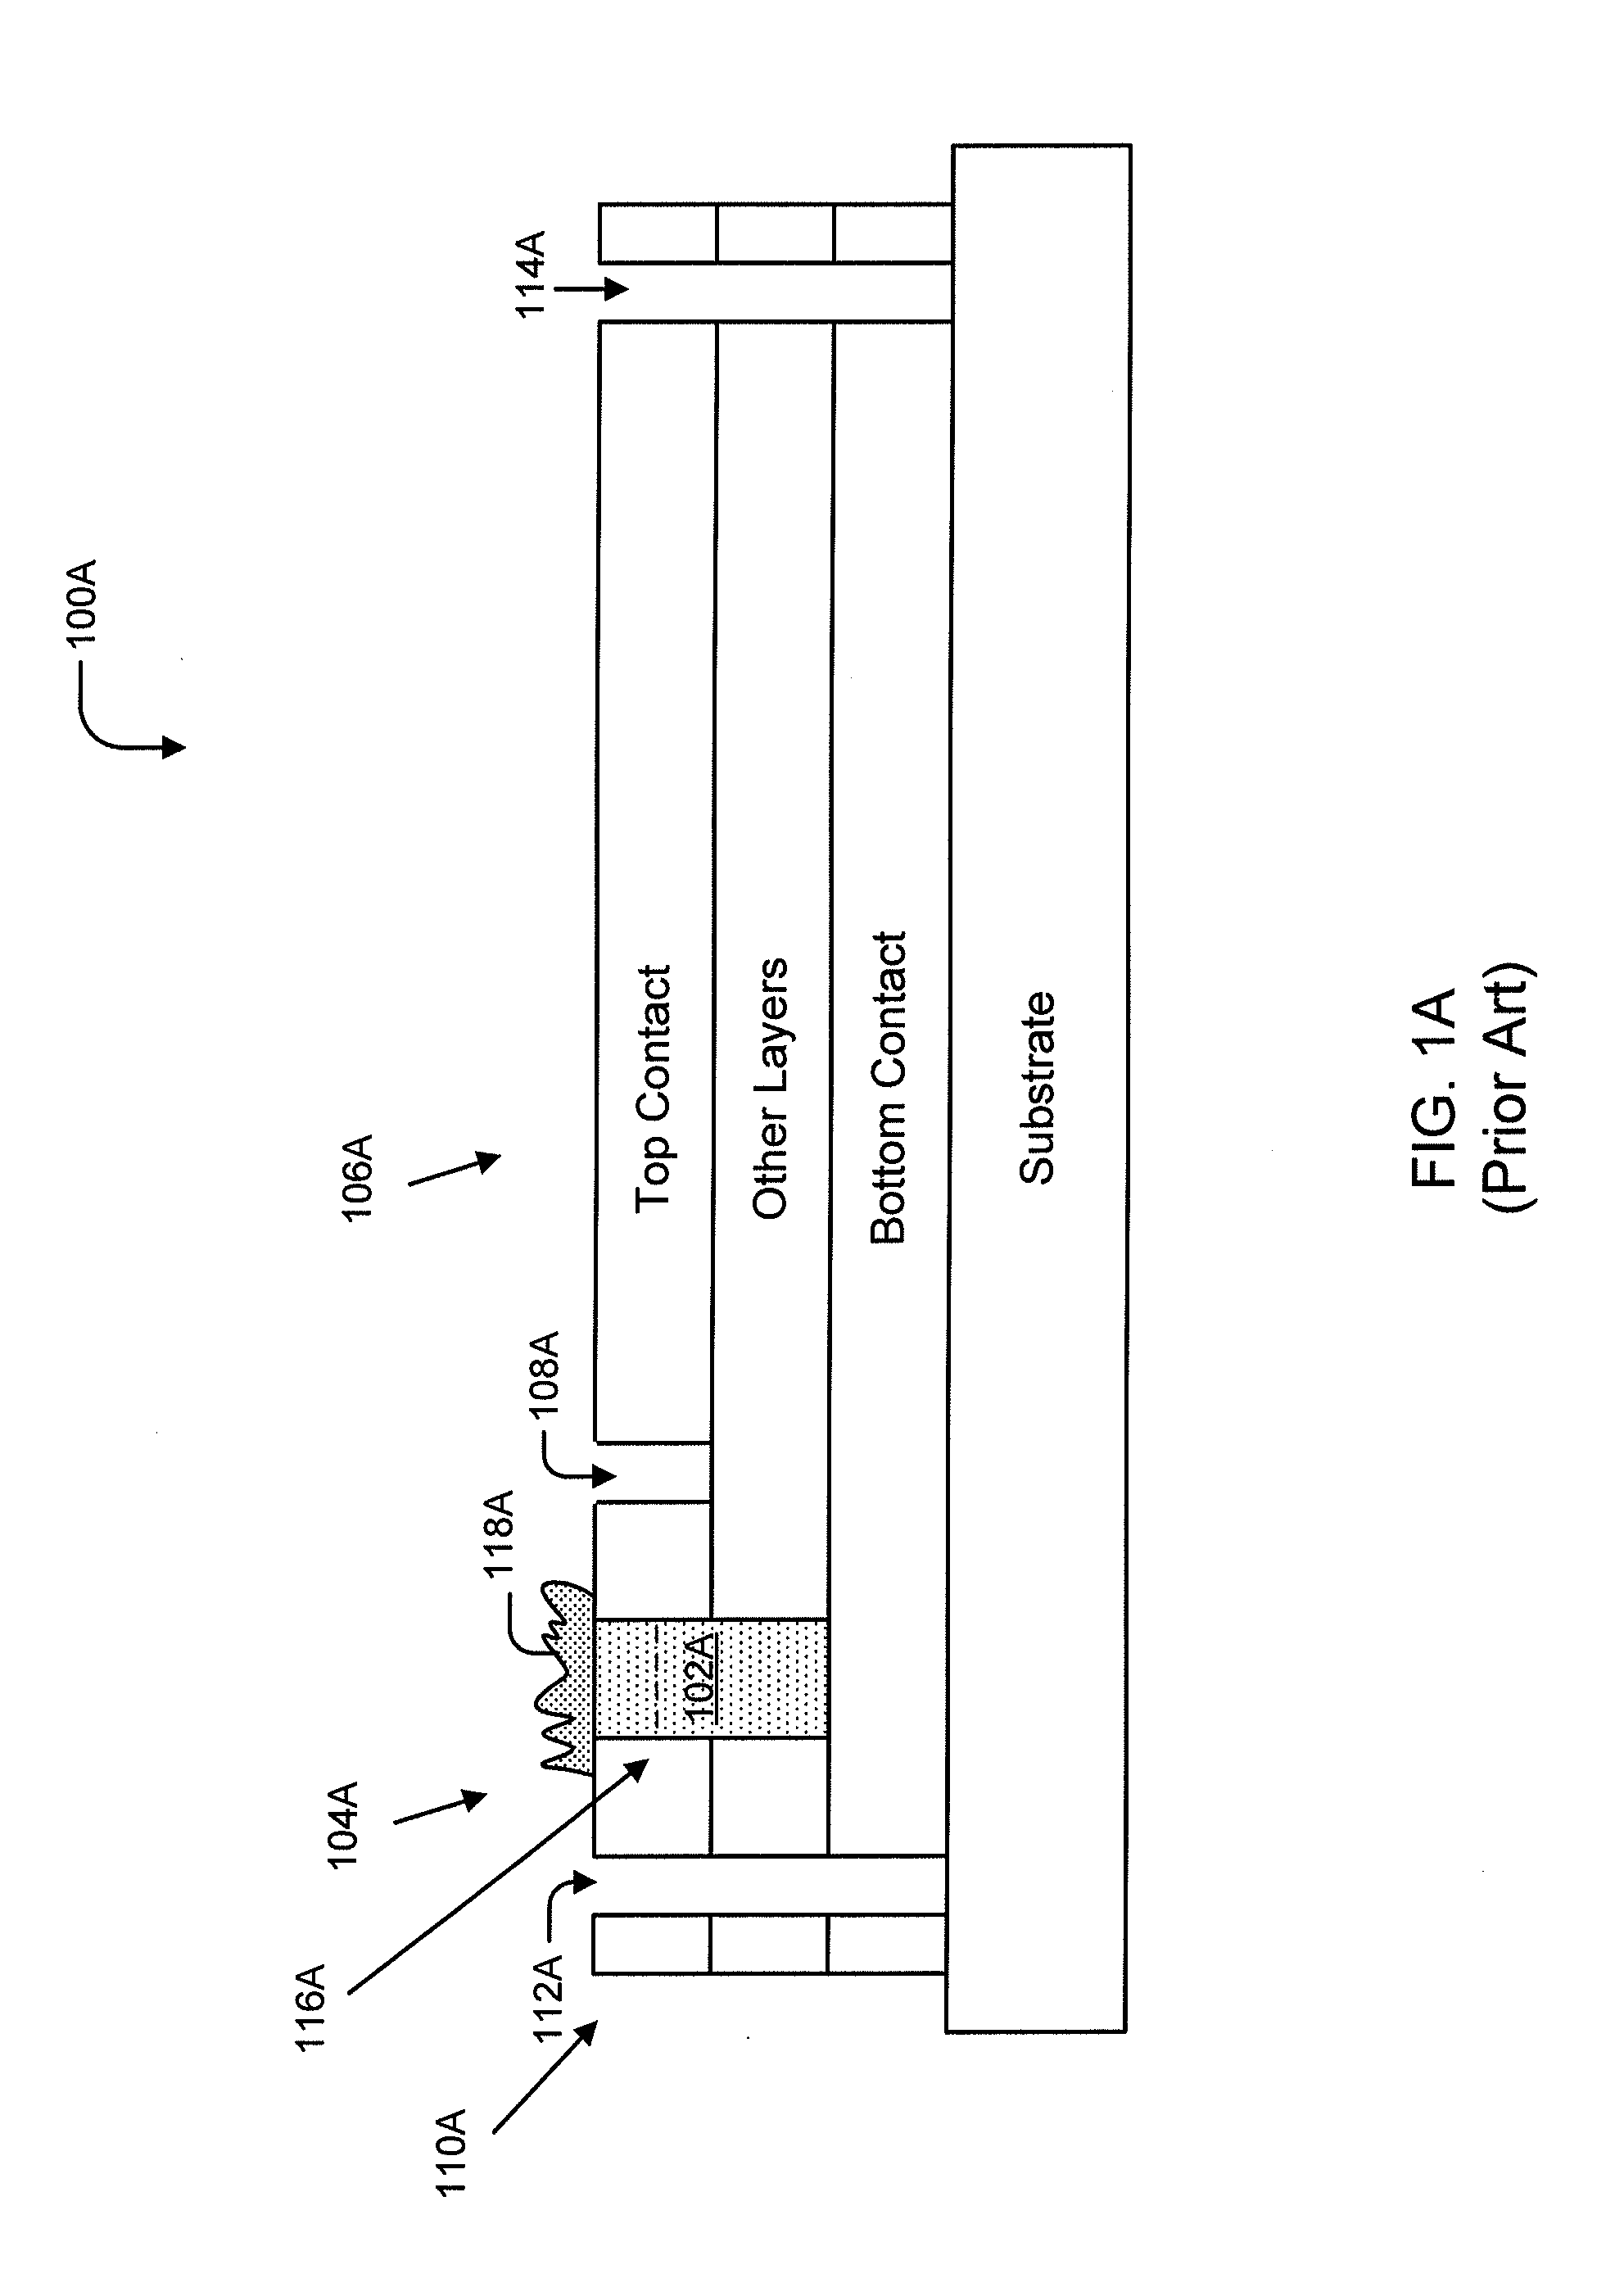 Perforation patterned electrical interconnects